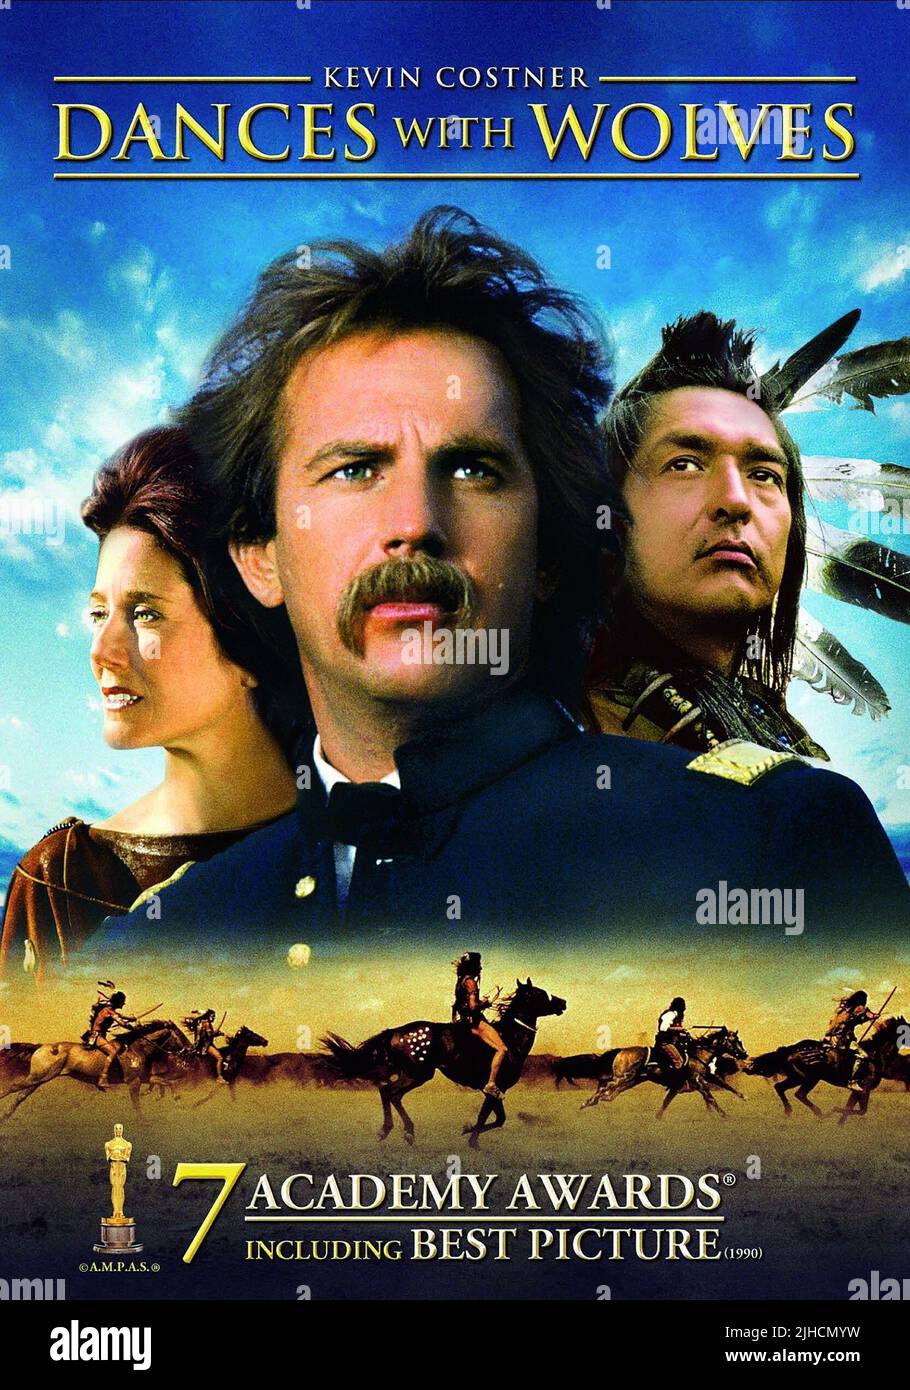 MARY MCDONNELL, KEVIN COSTNER, GRAHAM GREENE, DANCES WITH WOLVES, 1990 Stock Photo